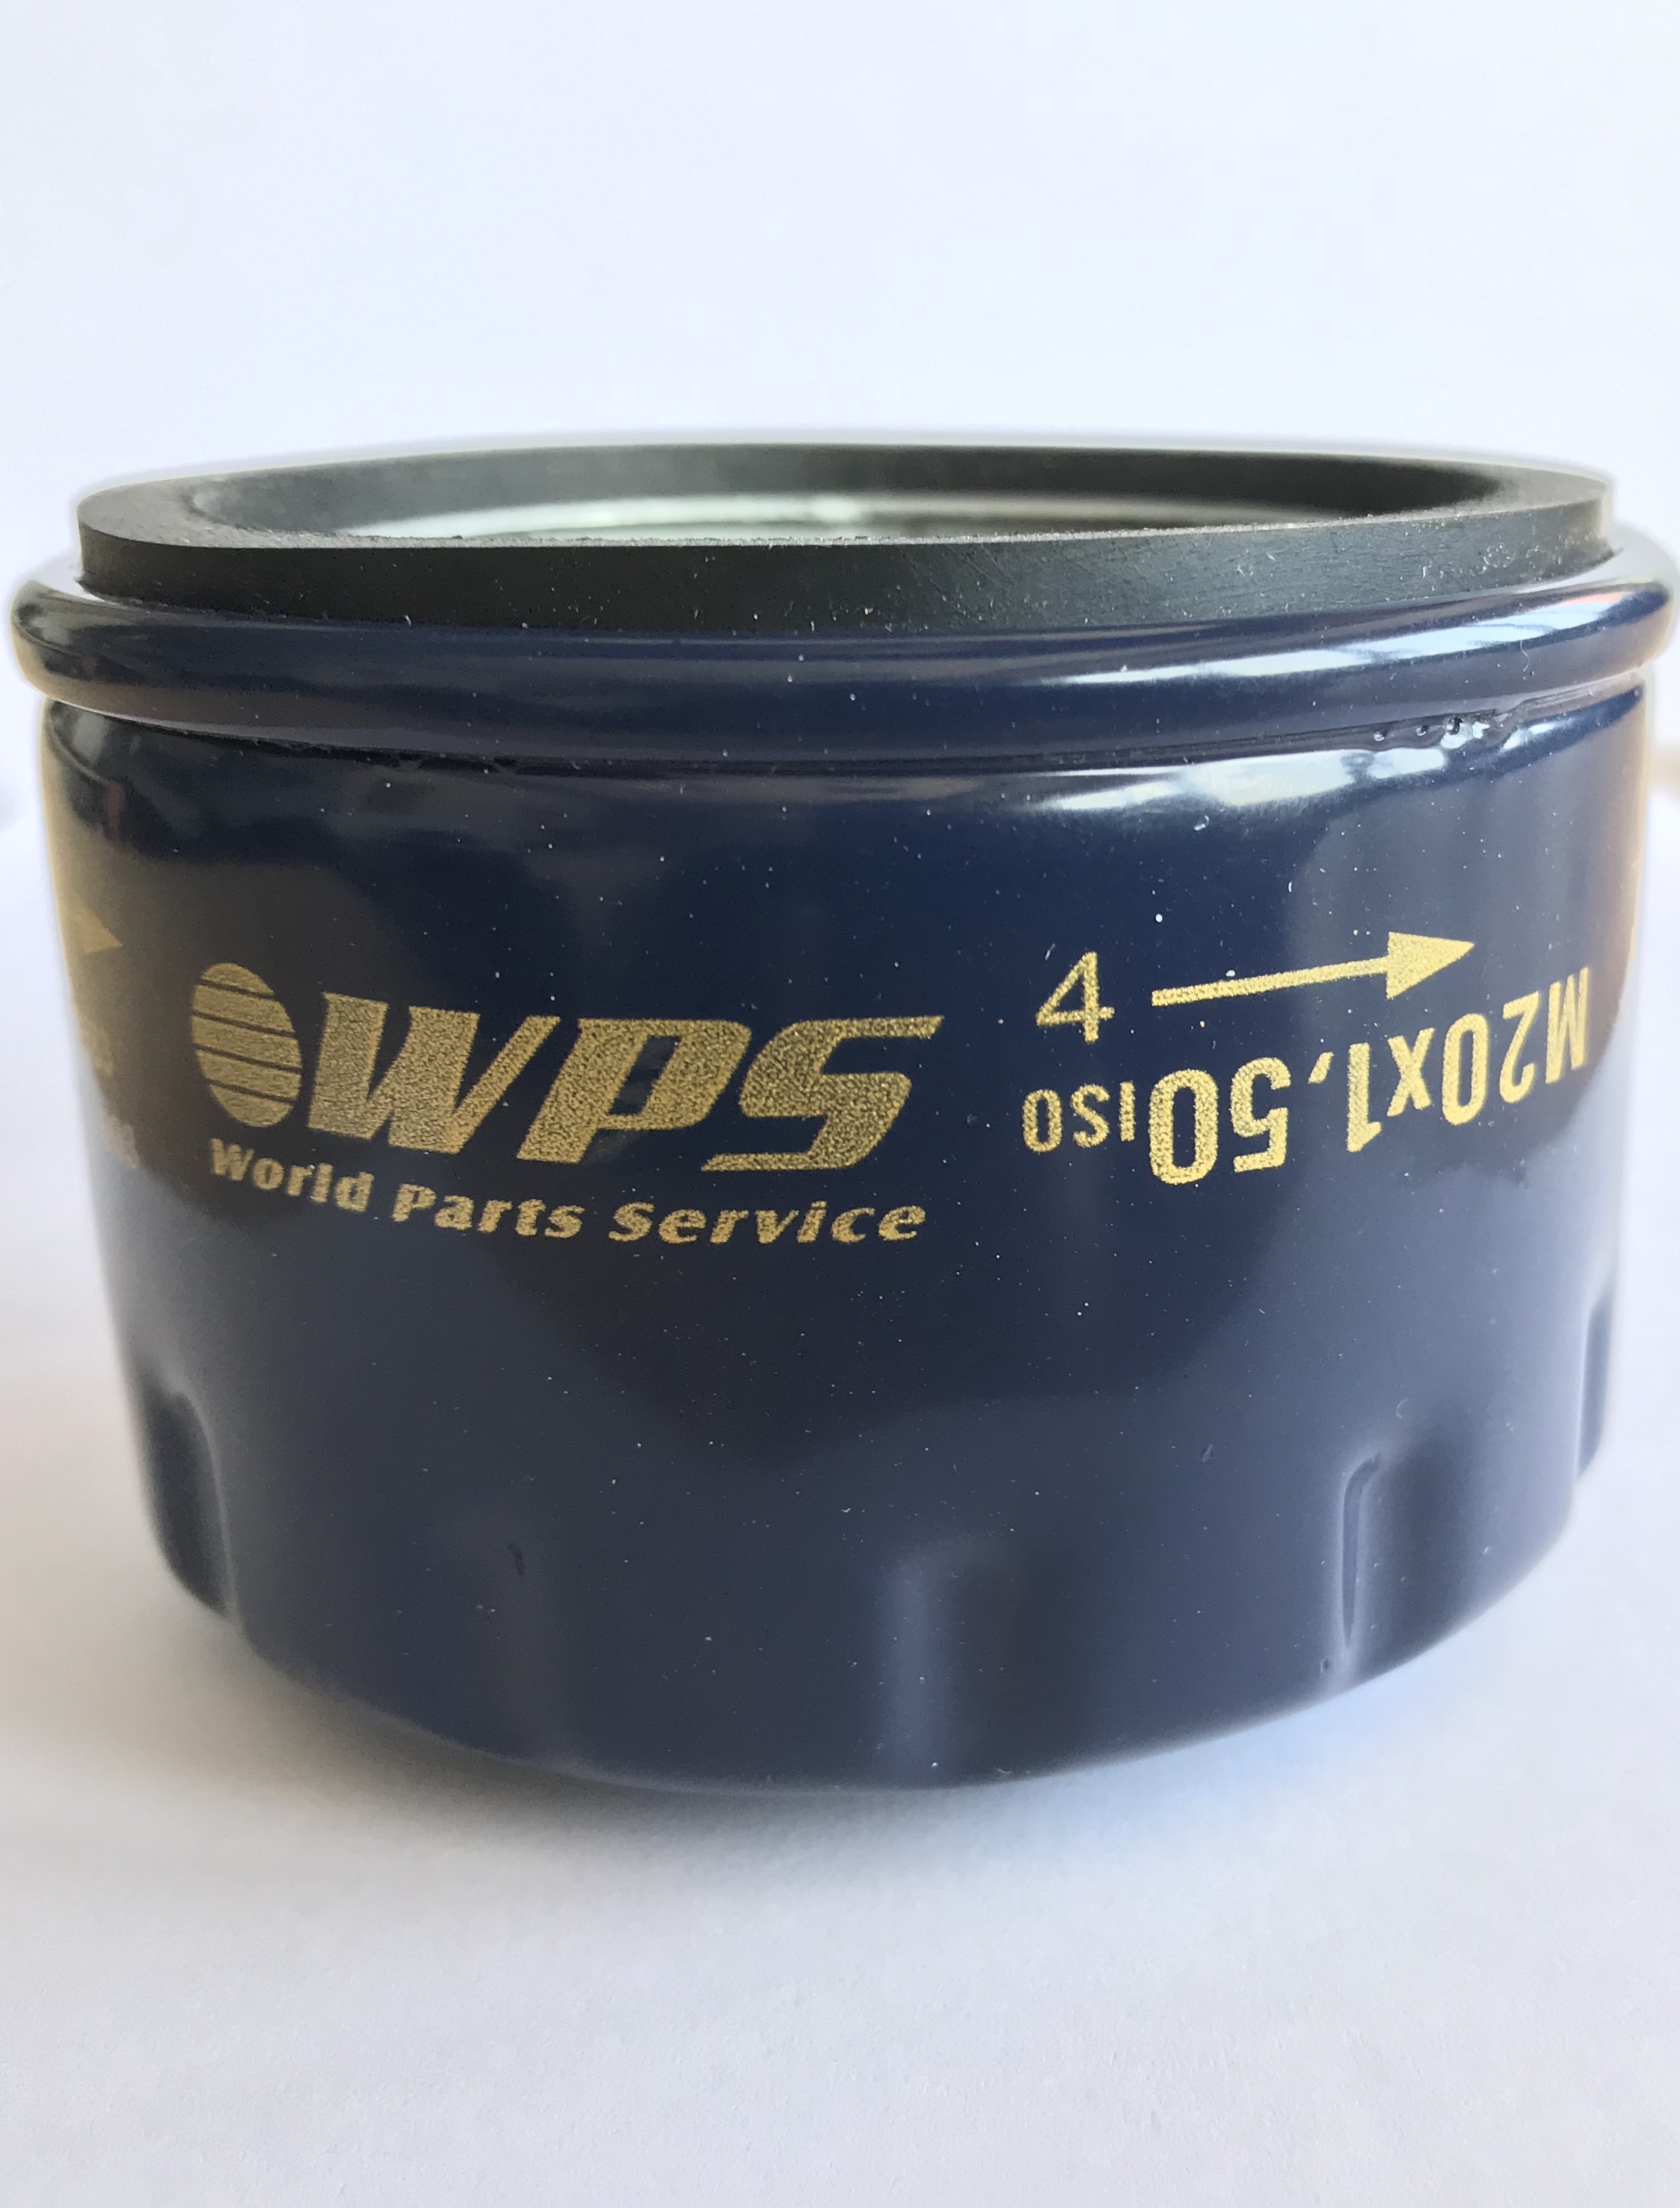 Oil Filter Renault 9-11-19 Clio KNG MGN LGN Traffic || WPS Word Parts Service